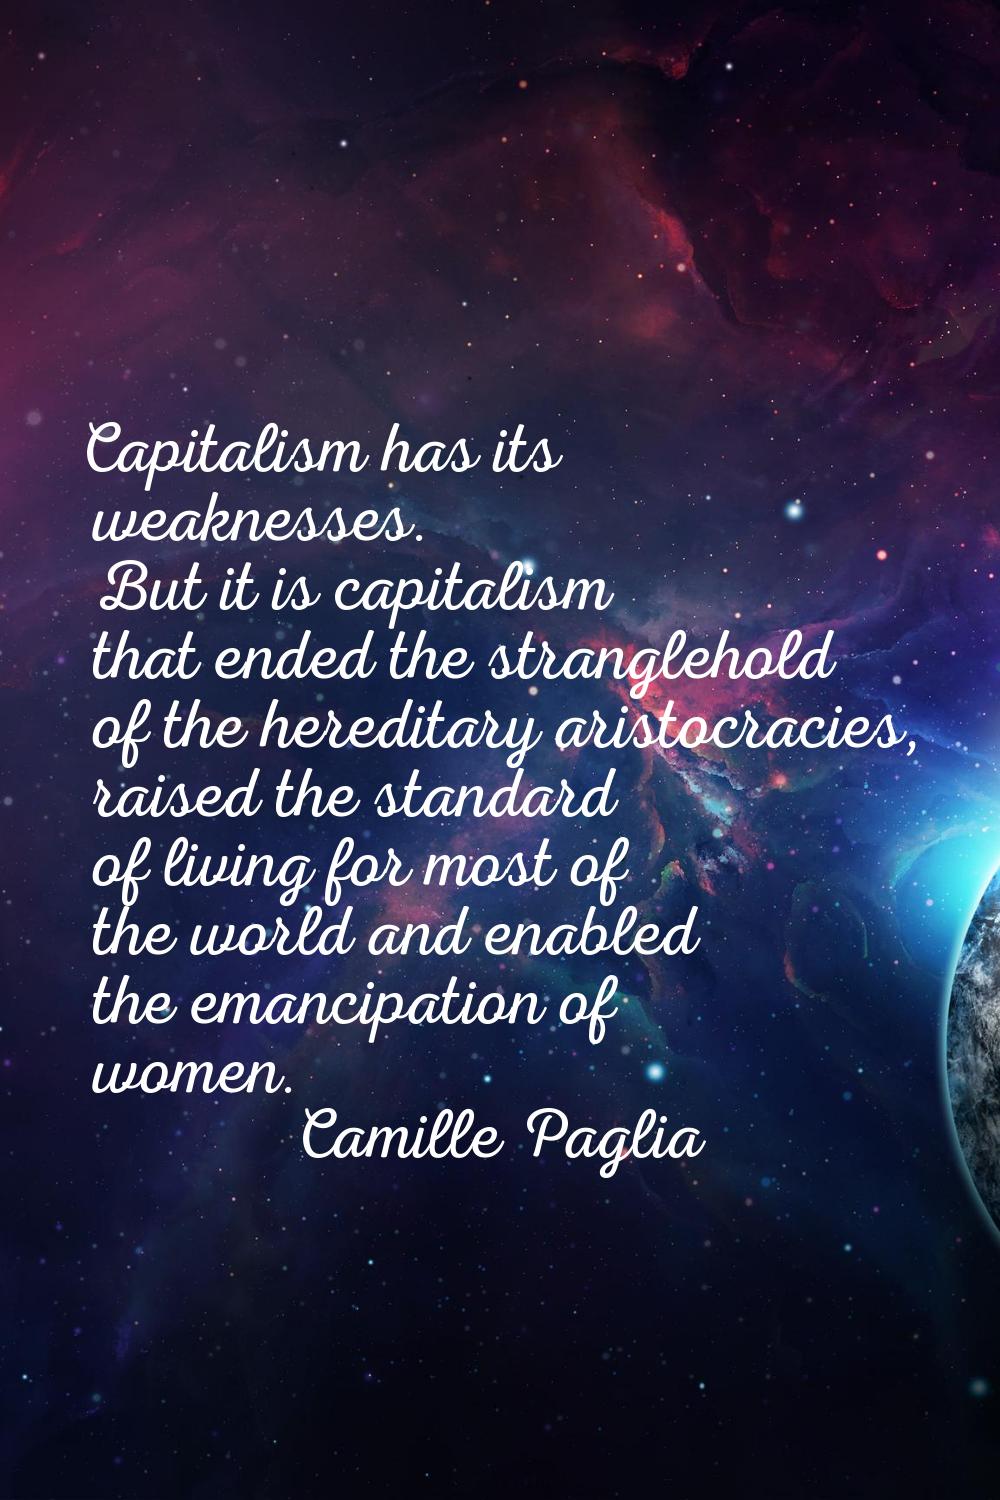 Capitalism has its weaknesses. But it is capitalism that ended the stranglehold of the hereditary a